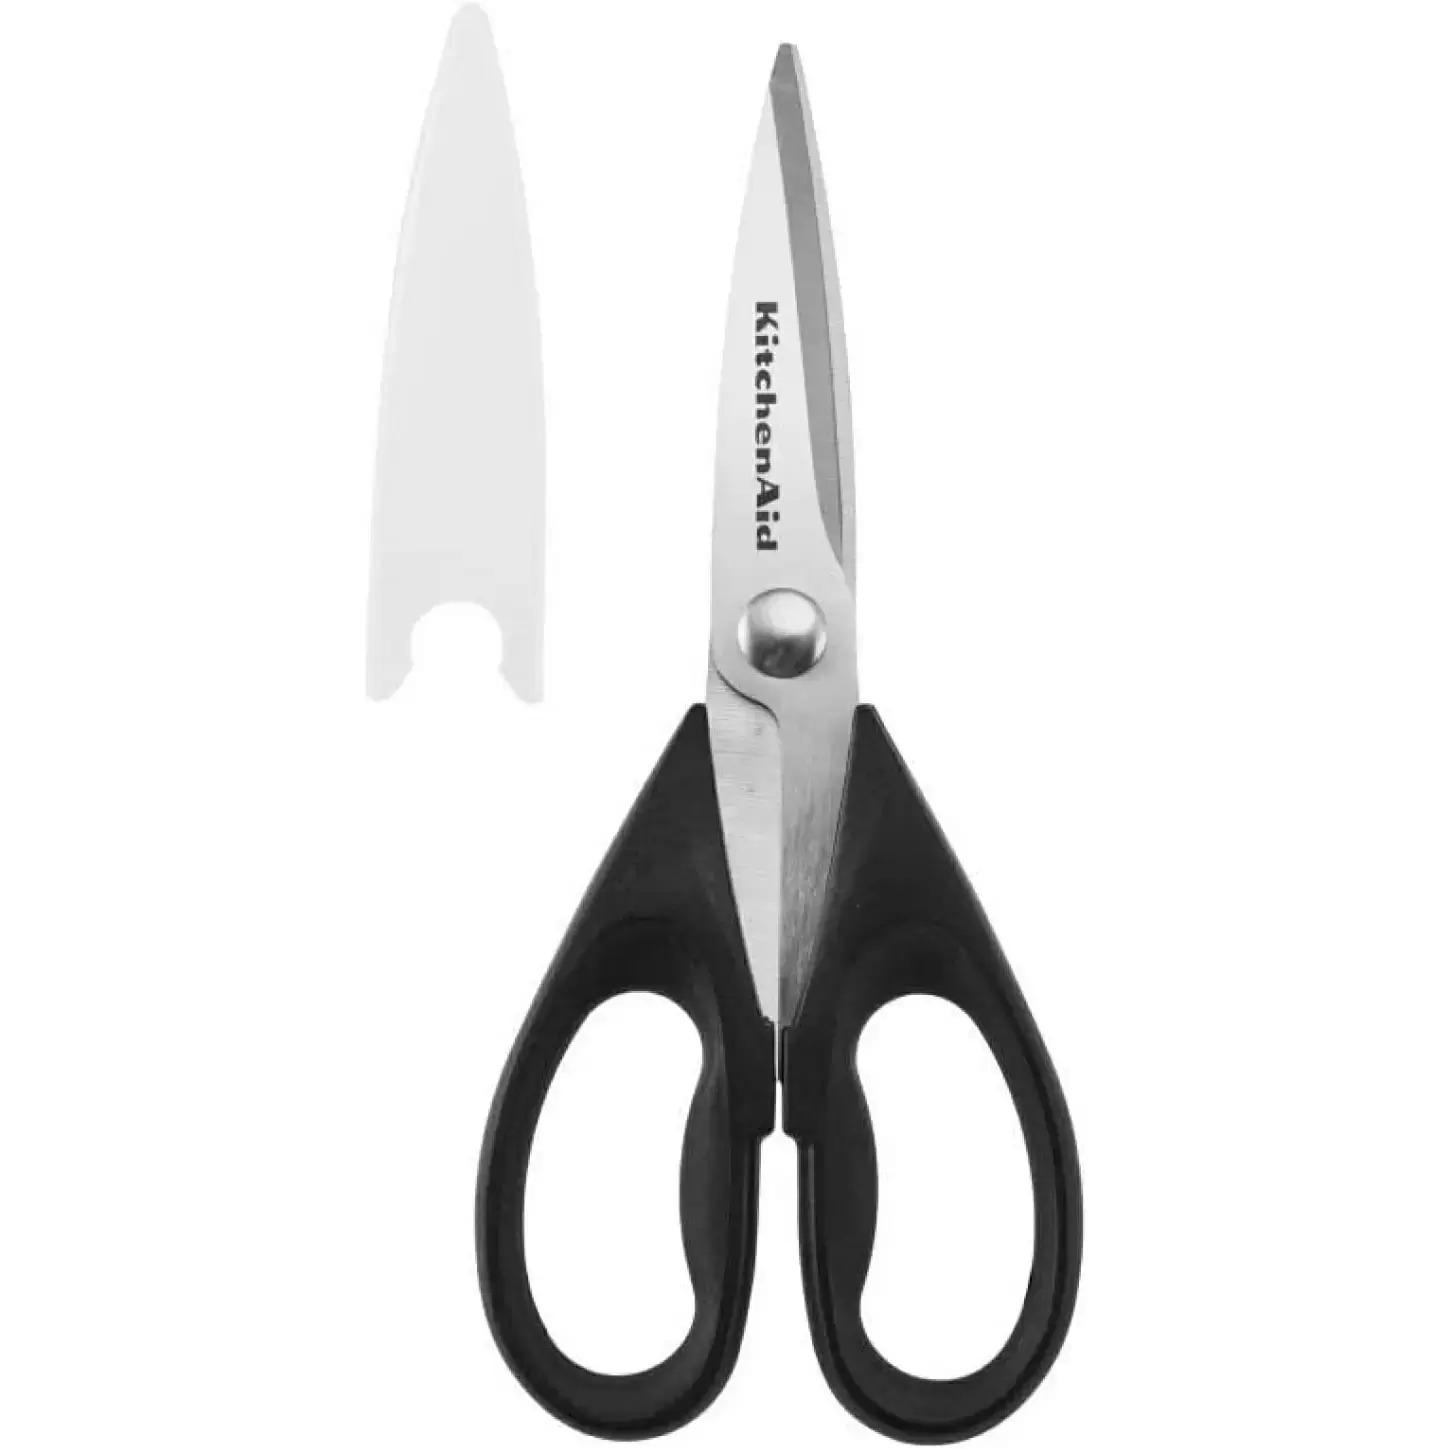 KitchenAid All Purpose Shears with Protective Sheath for $5.78